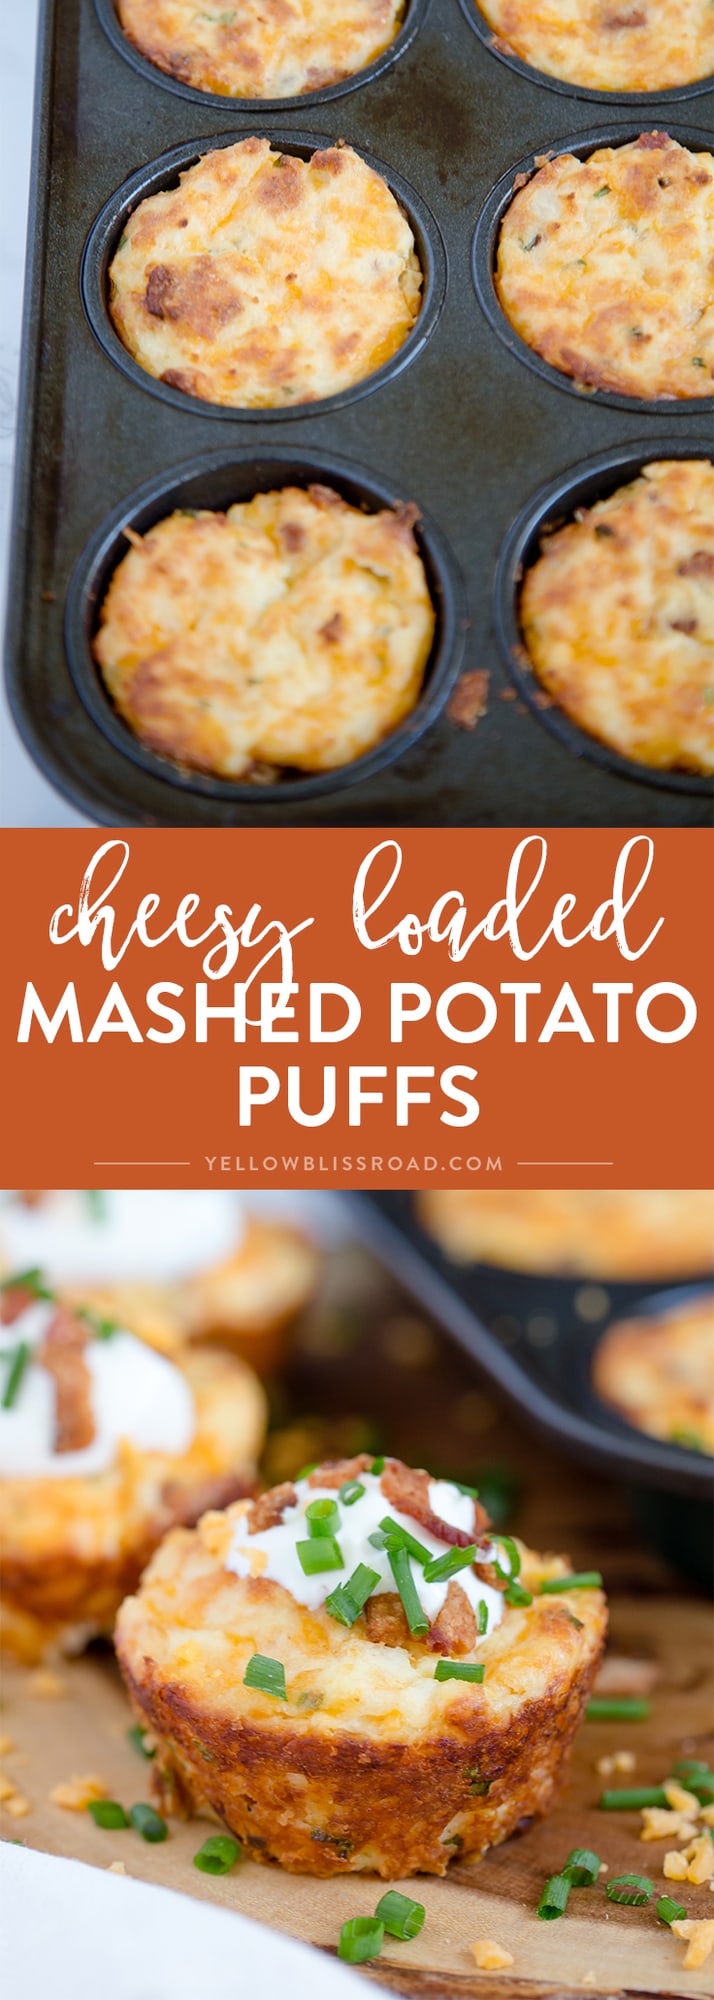 Loaded Mashed Potato Puffs are filled with bacon, cheese and chives and are perfect for an unexpected dinner side or your Easter Brunch!